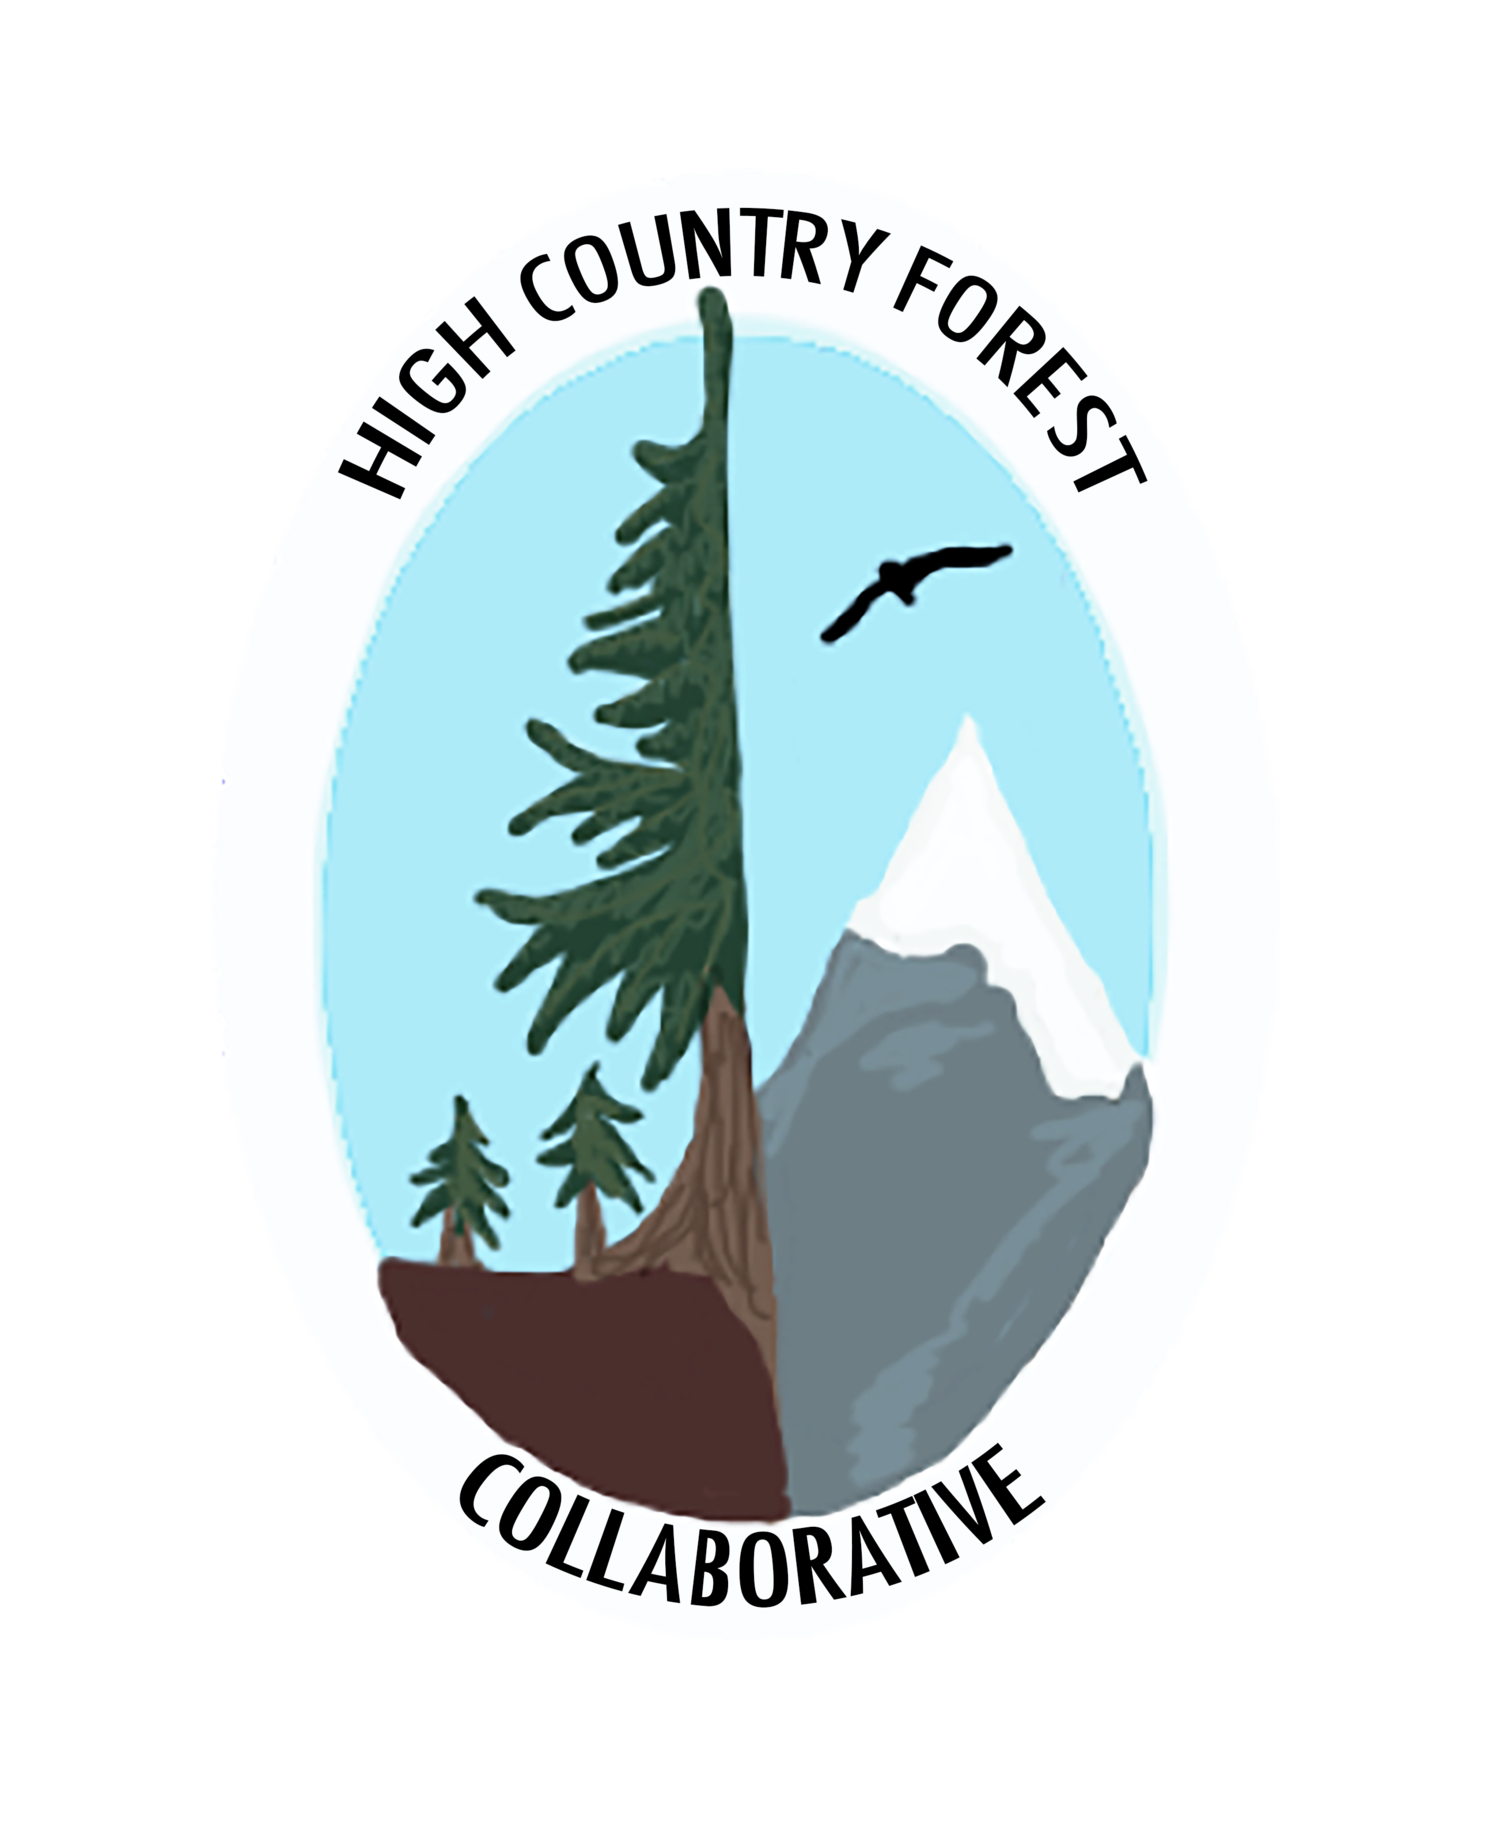 High Country Forest Collaborative